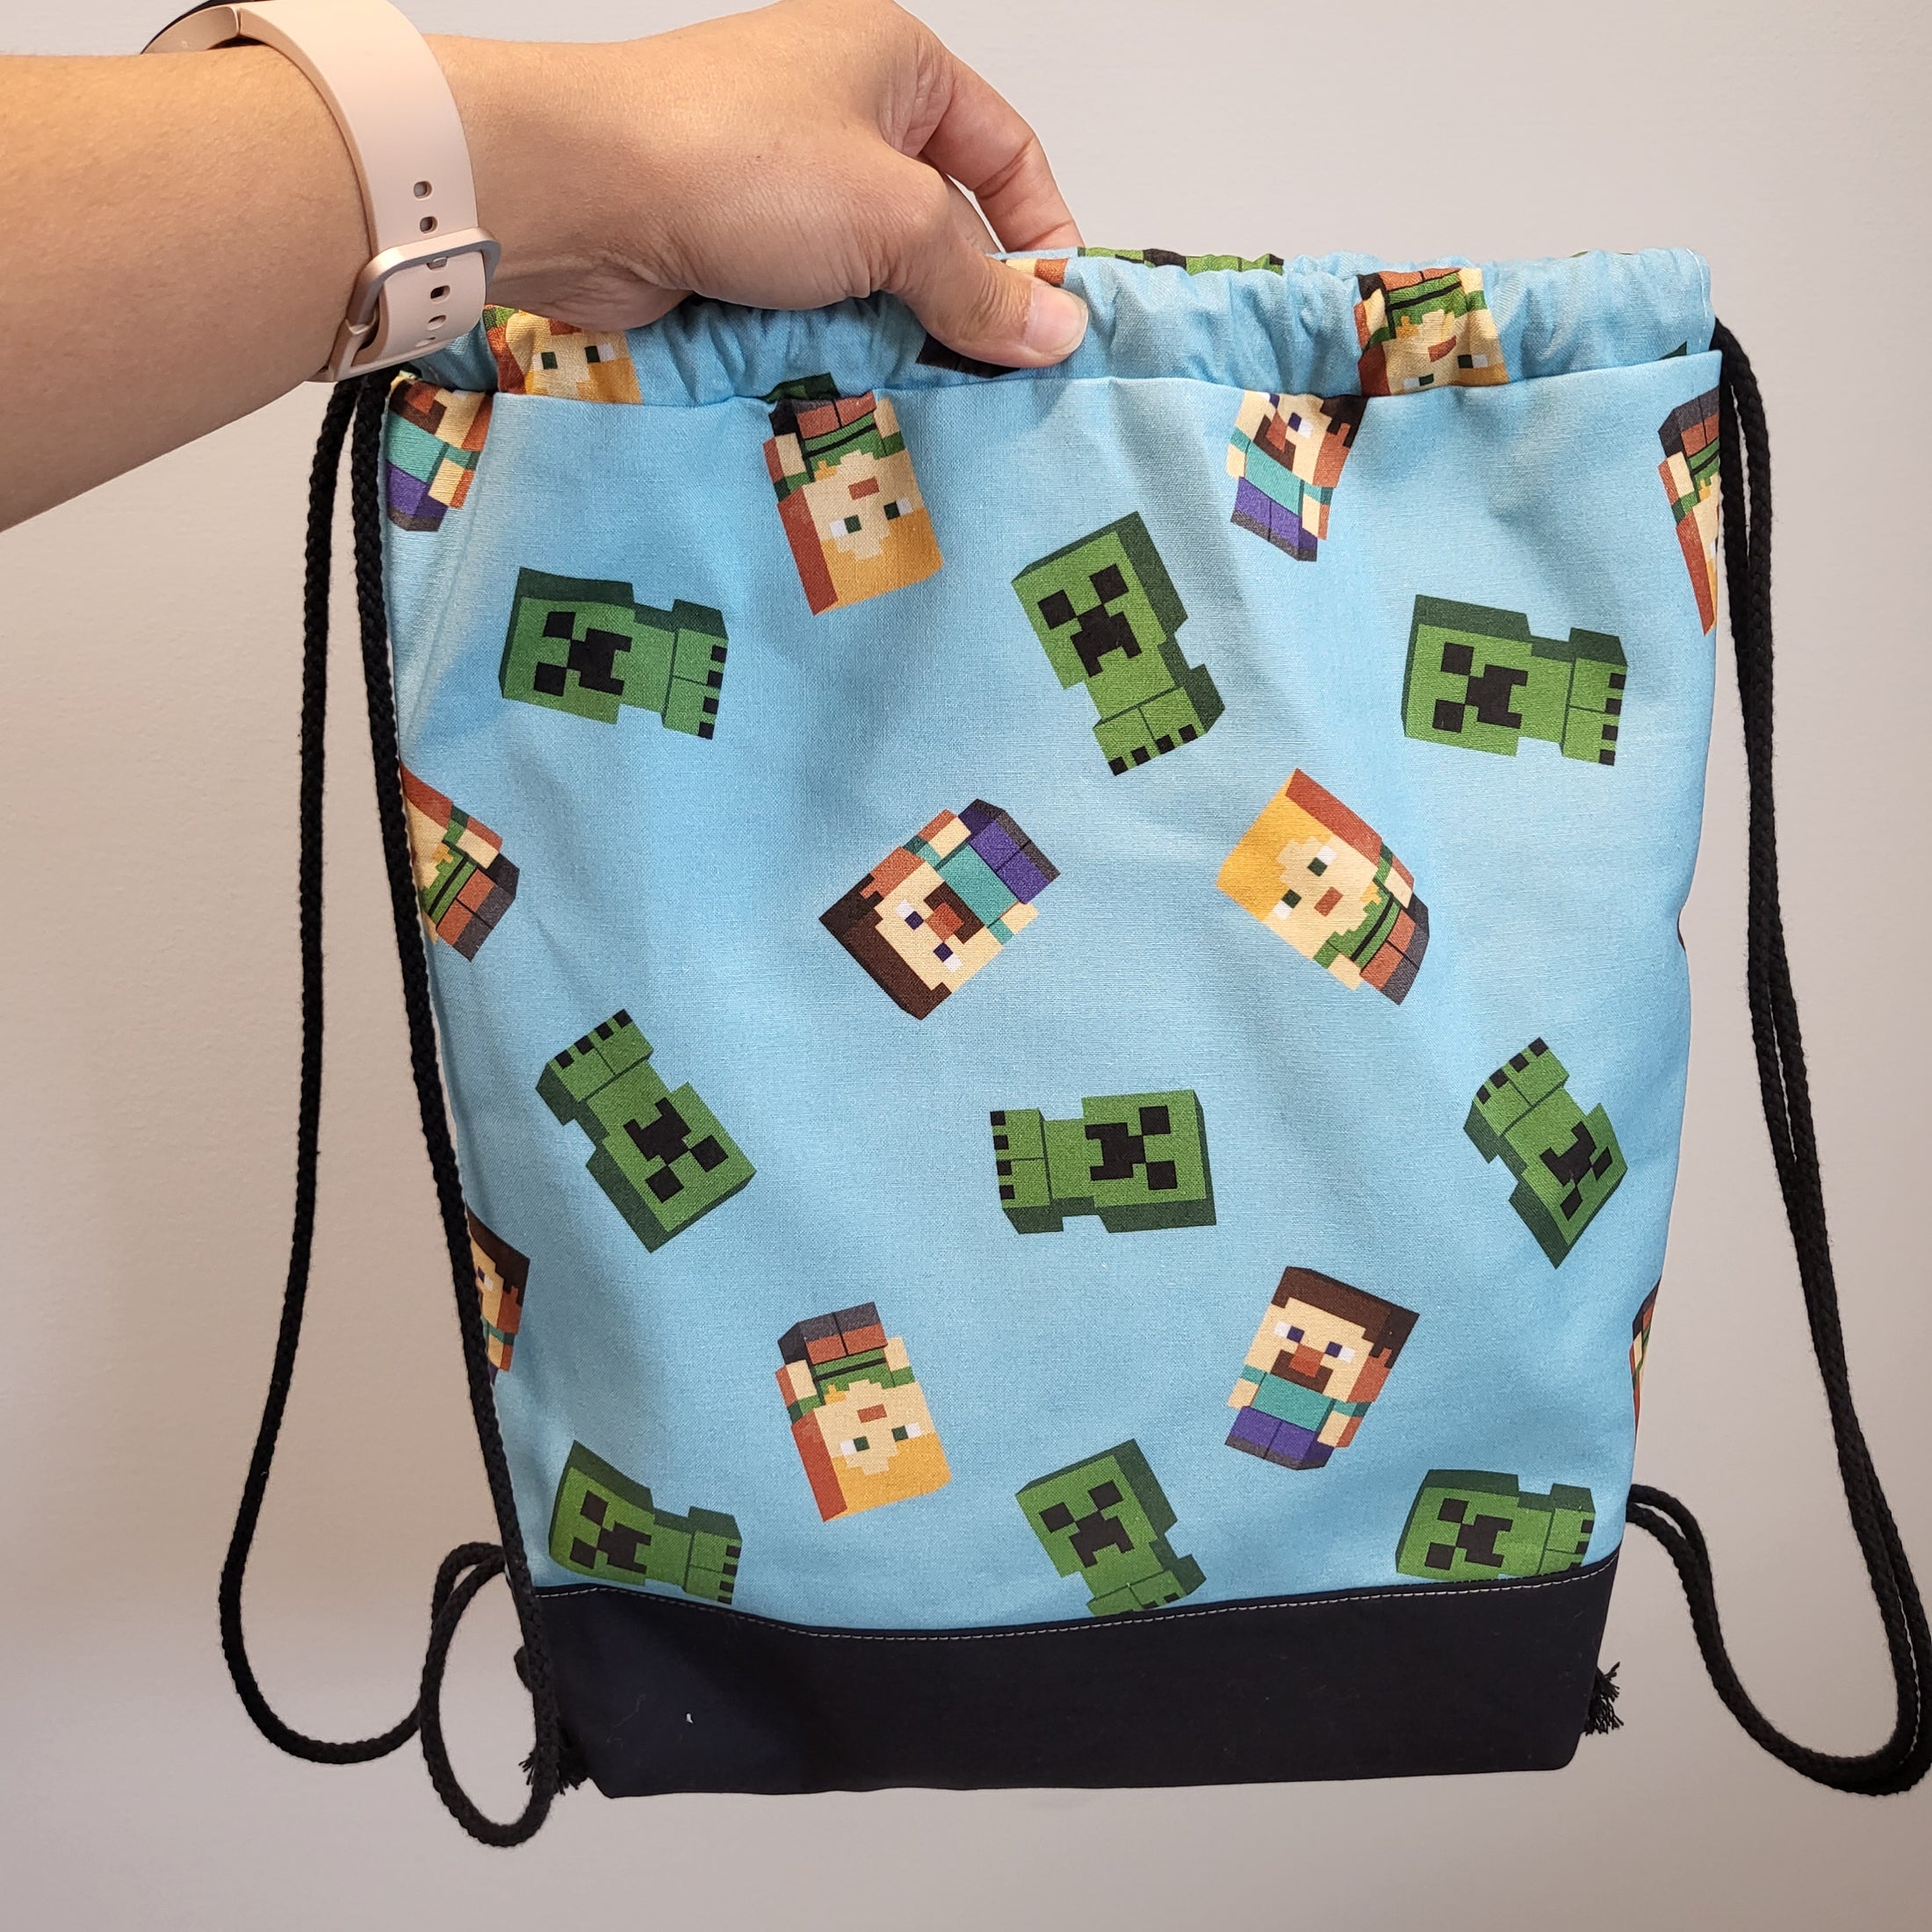 Back of the Minecraft themed drawstring backpack, uncinched, showing the characters Alex, Steve and Creeper.